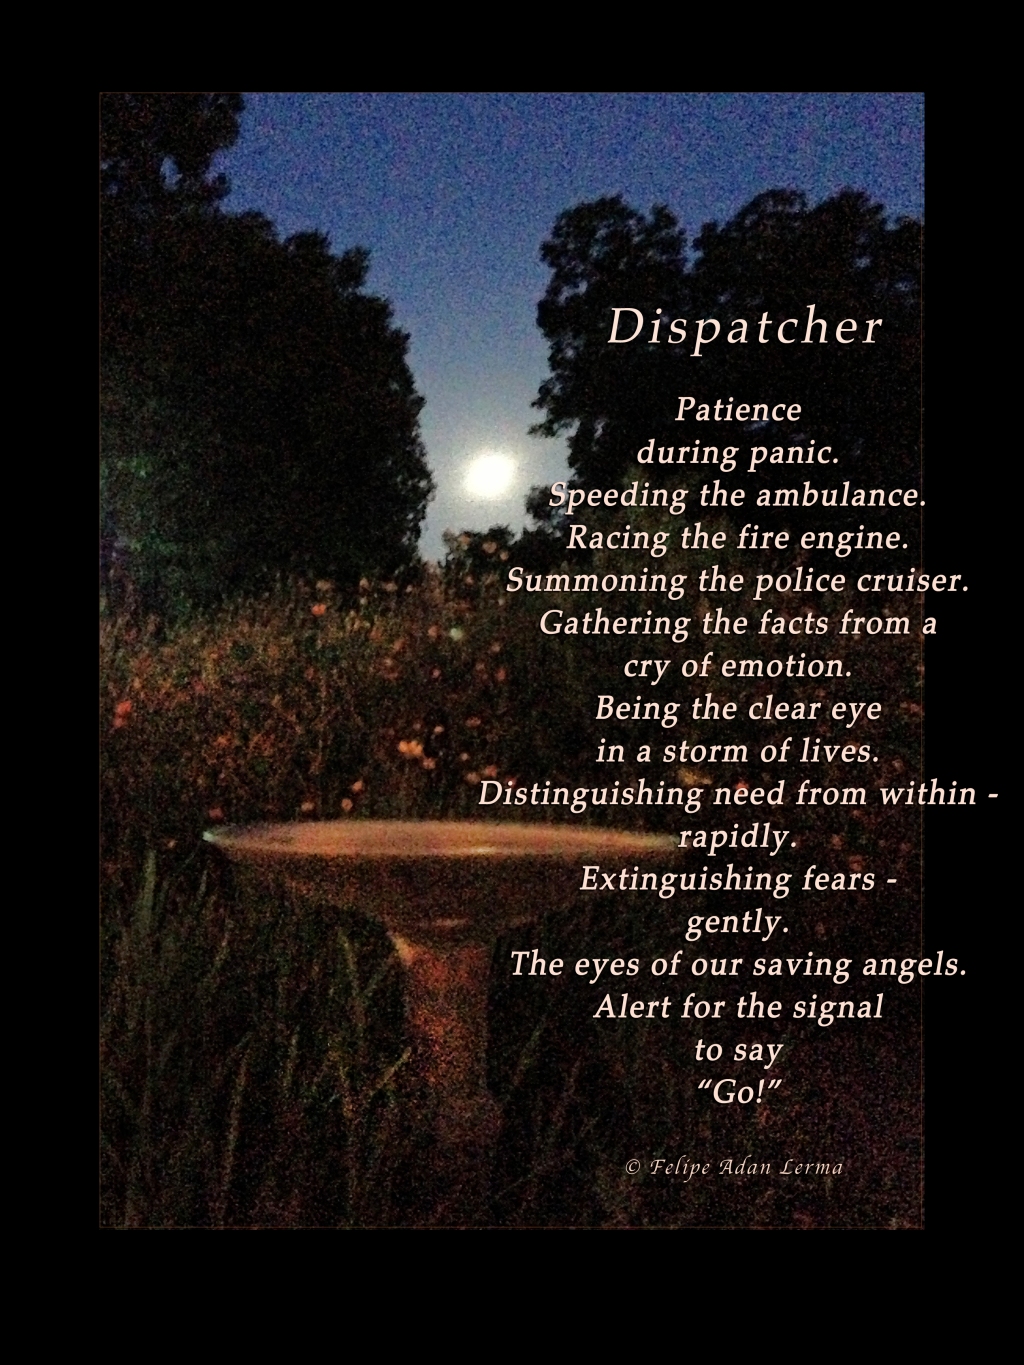 March 07, 2021 – Dispatcher – Gift Writing / Poetry by Adan